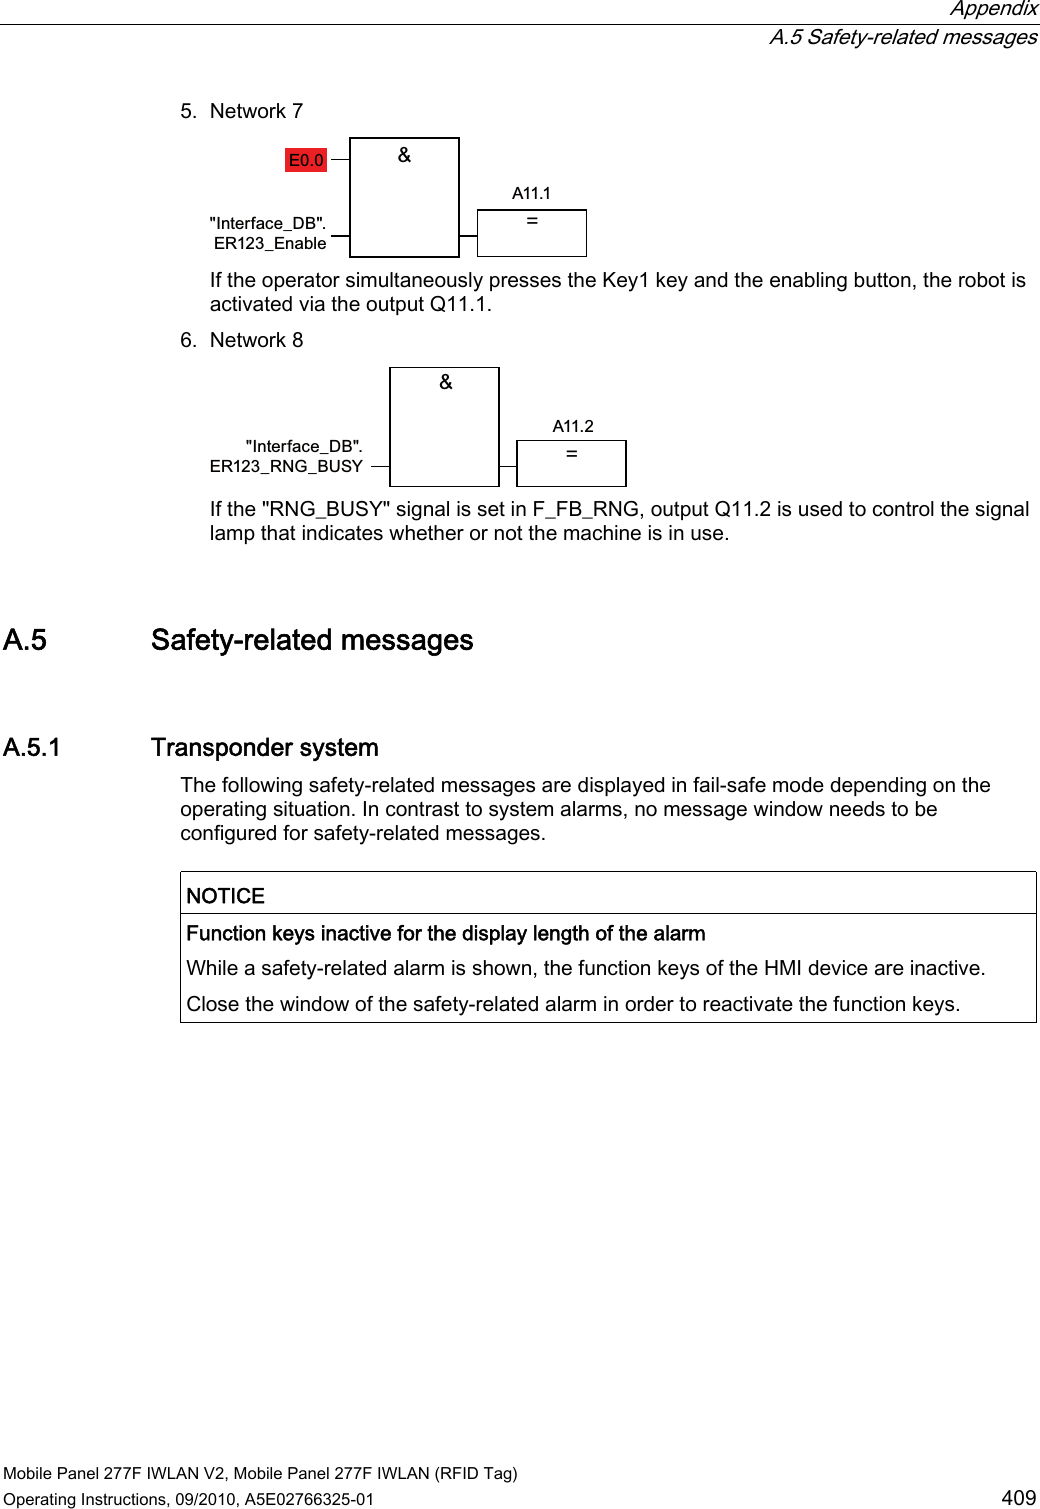  Appendix  A.5 Safety-related messages Mobile Panel 277F IWLAN V2, Mobile Panel 277F IWLAN (RFID Tag) Operating Instructions, 09/2010, A5E02766325-01  409 5. Network 7  ($,QWHUIDFHB&apos;%(5B(QDEOH If the operator simultaneously presses the Key1 key and the enabling button, the robot is activated via the output Q11.1. 6. Network 8  ,QWHUIDFHB&apos;%(5B51*B%86&lt;$  If the &quot;RNG_BUSY&quot; signal is set in F_FB_RNG, output Q11.2 is used to control the signal lamp that indicates whether or not the machine is in use. A.5 Safety-related messages A.5.1 Transponder system The following safety-related messages are displayed in fail-safe mode depending on the operating situation. In contrast to system alarms, no message window needs to be configured for safety-related messages.  NOTICE  Function keys inactive for the display length of the alarm While a safety-related alarm is shown, the function keys of the HMI device are inactive. Close the window of the safety-related alarm in order to reactivate the function keys.  REVIEW ENGLISH 27.07.2010